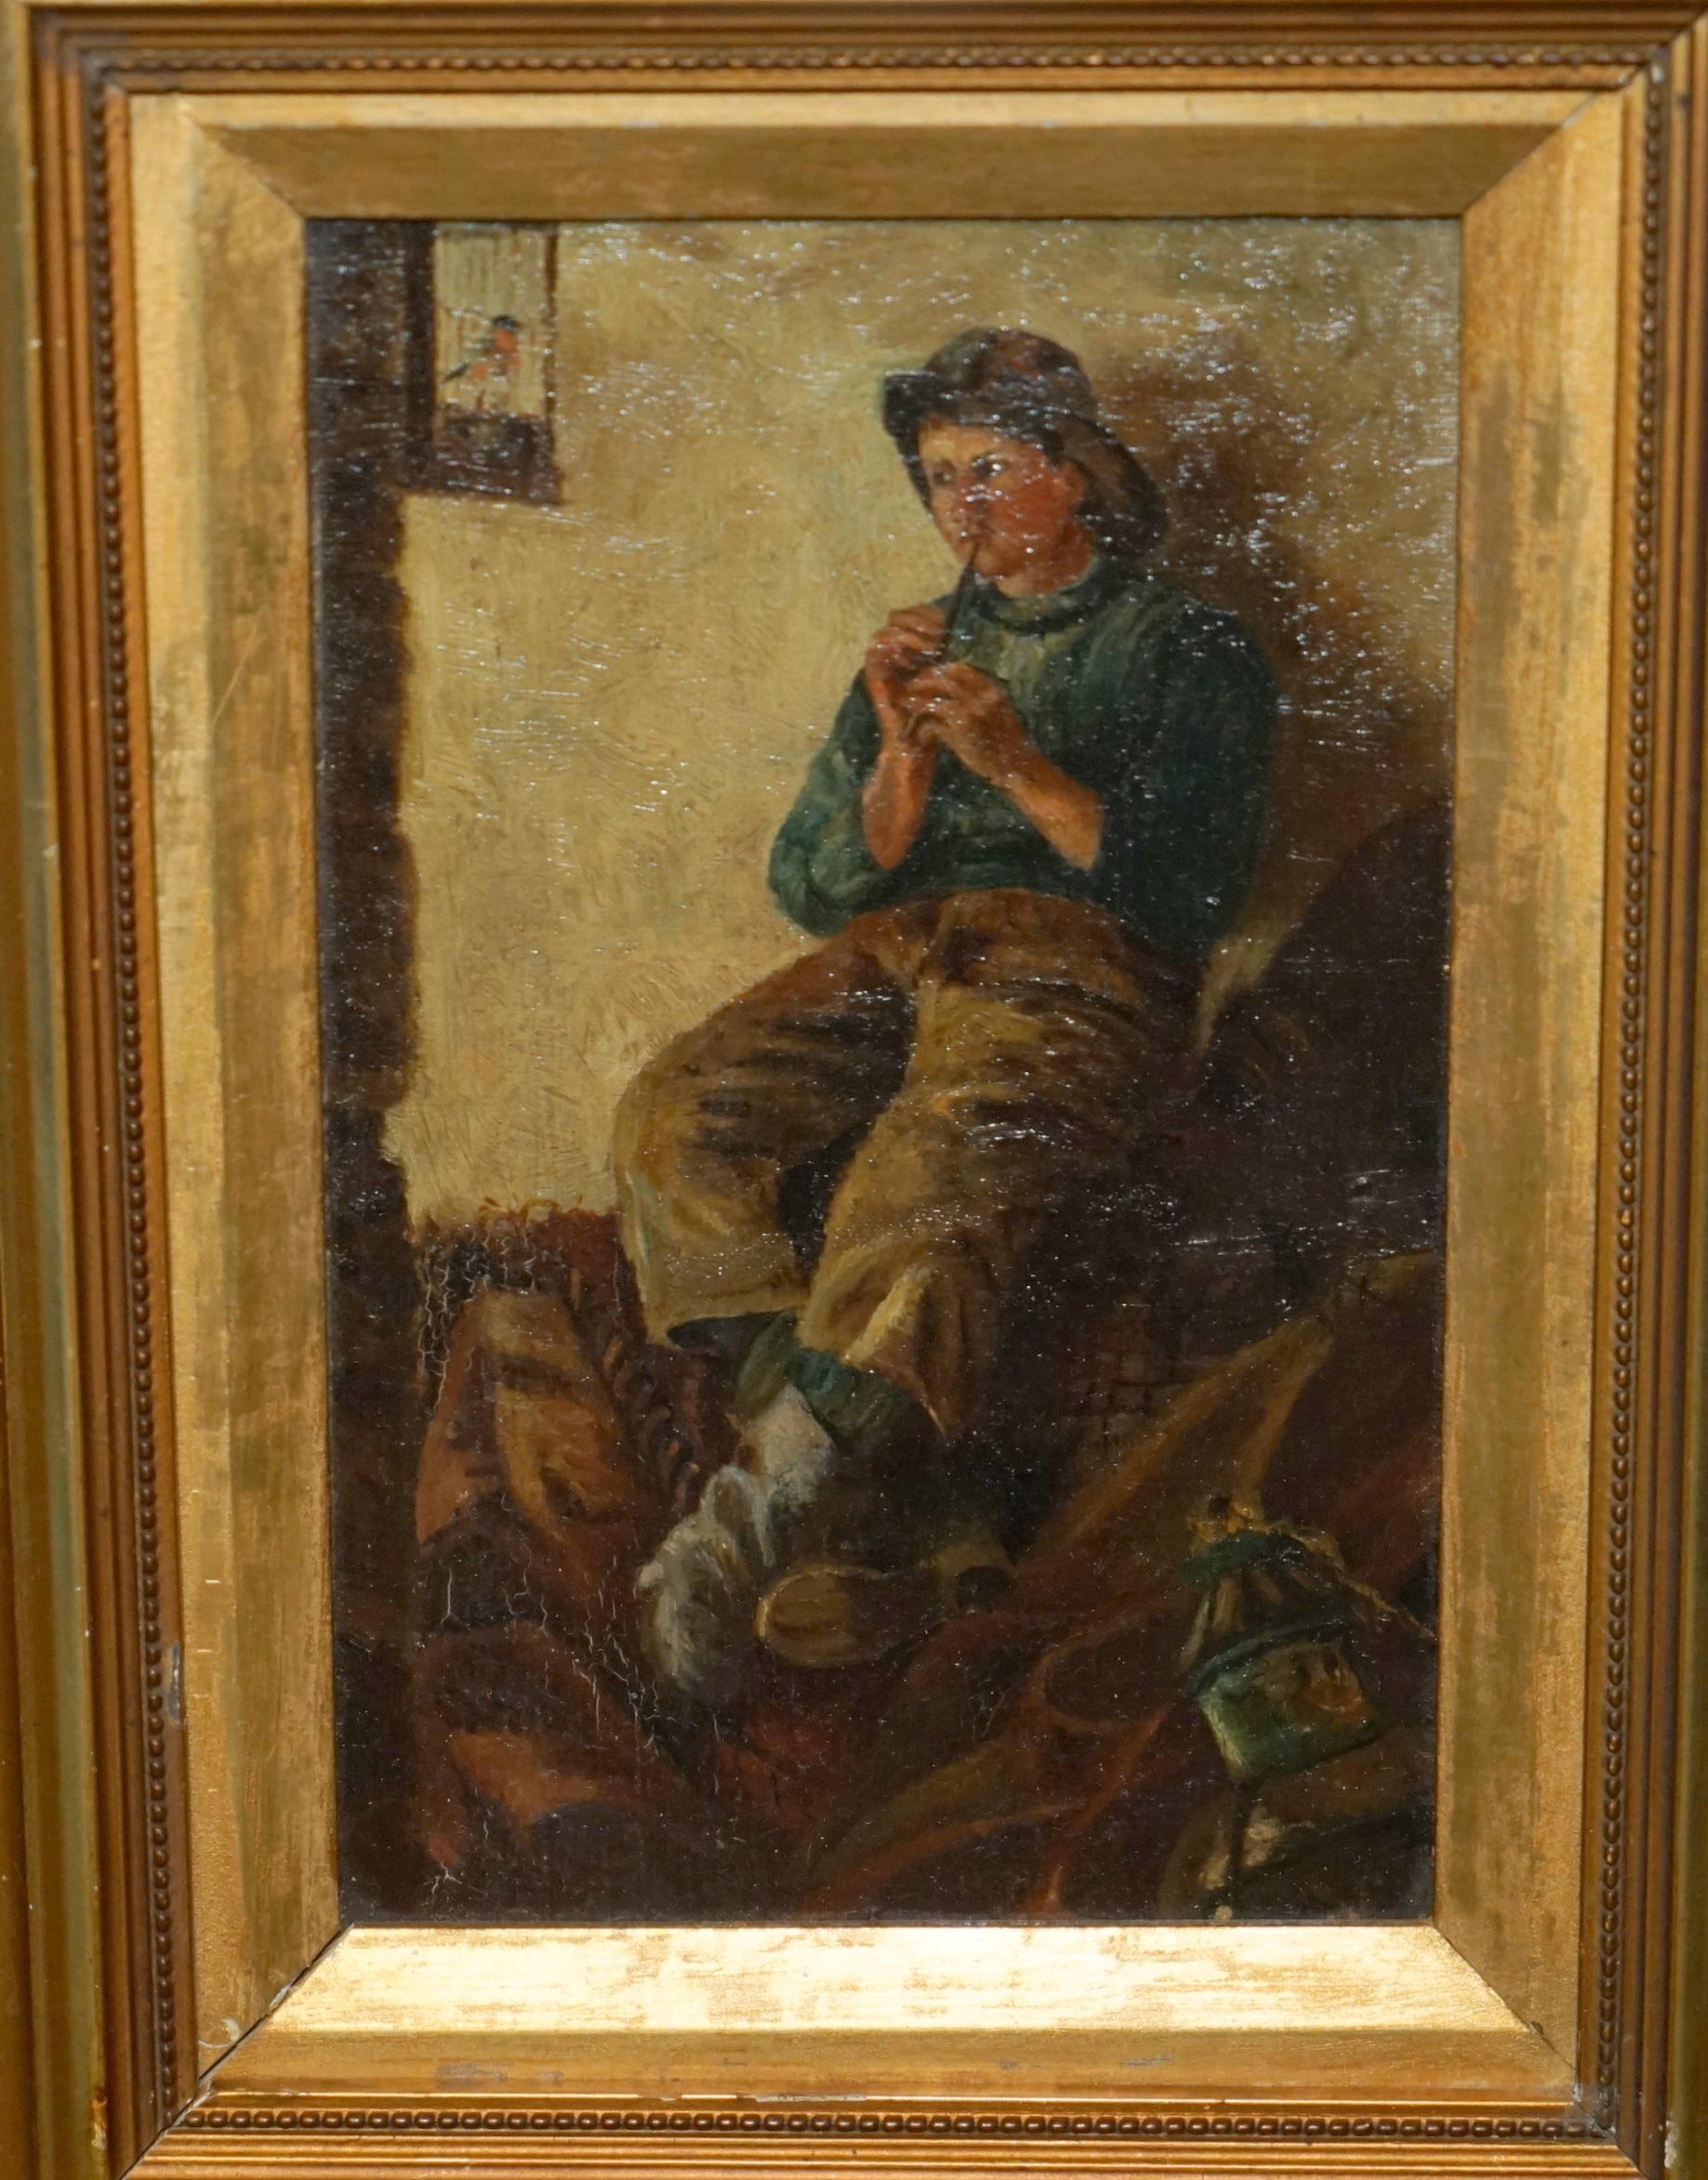 English SUBLIME ANTIQUE ViCTORIAN OIL PAINTING OF A YOUNG BOY (FISHERMAN) PLAYING A PIPE For Sale